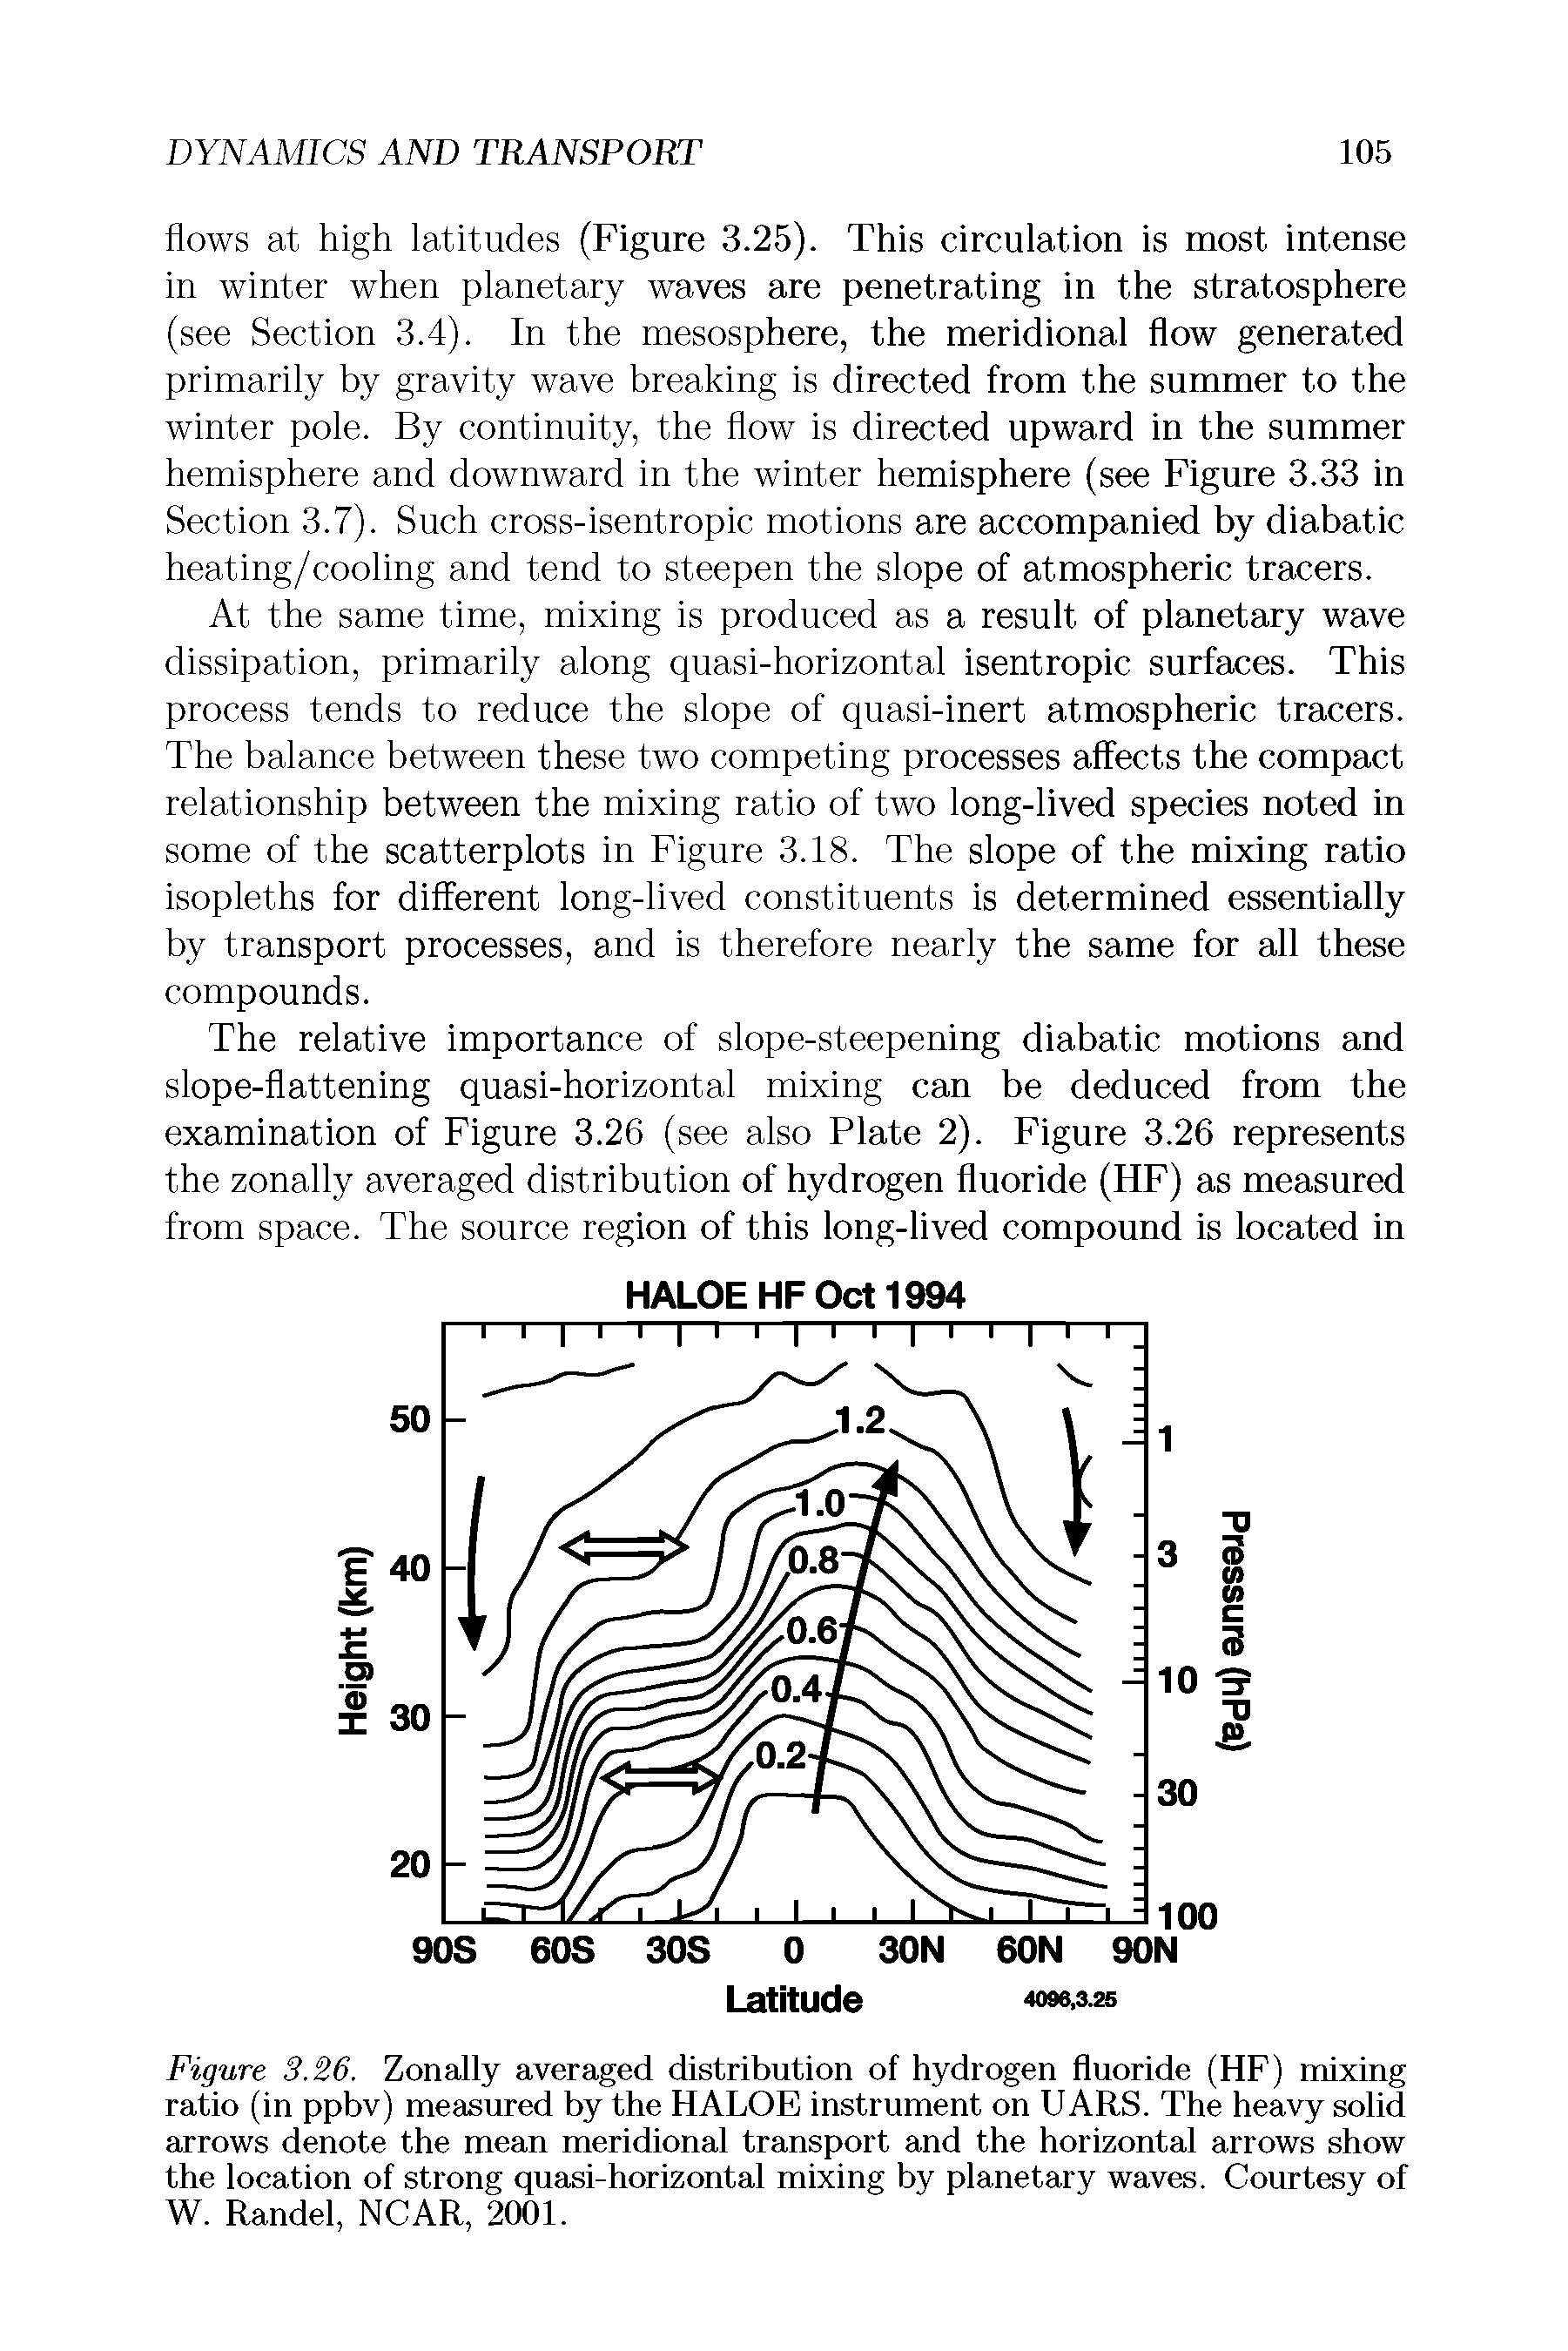 Figure 3.26. Zonally averaged distribution of hydrogen fluoride (HF) mixing ratio (in ppbv) measured by the HALOE instrument on UARS. The heavy solid arrows denote the mean meridional transport and the horizontal arrows show the location of strong quasi-horizontal mixing by planetary waves. Courtesy of W. Randel, NCAR, 2001.